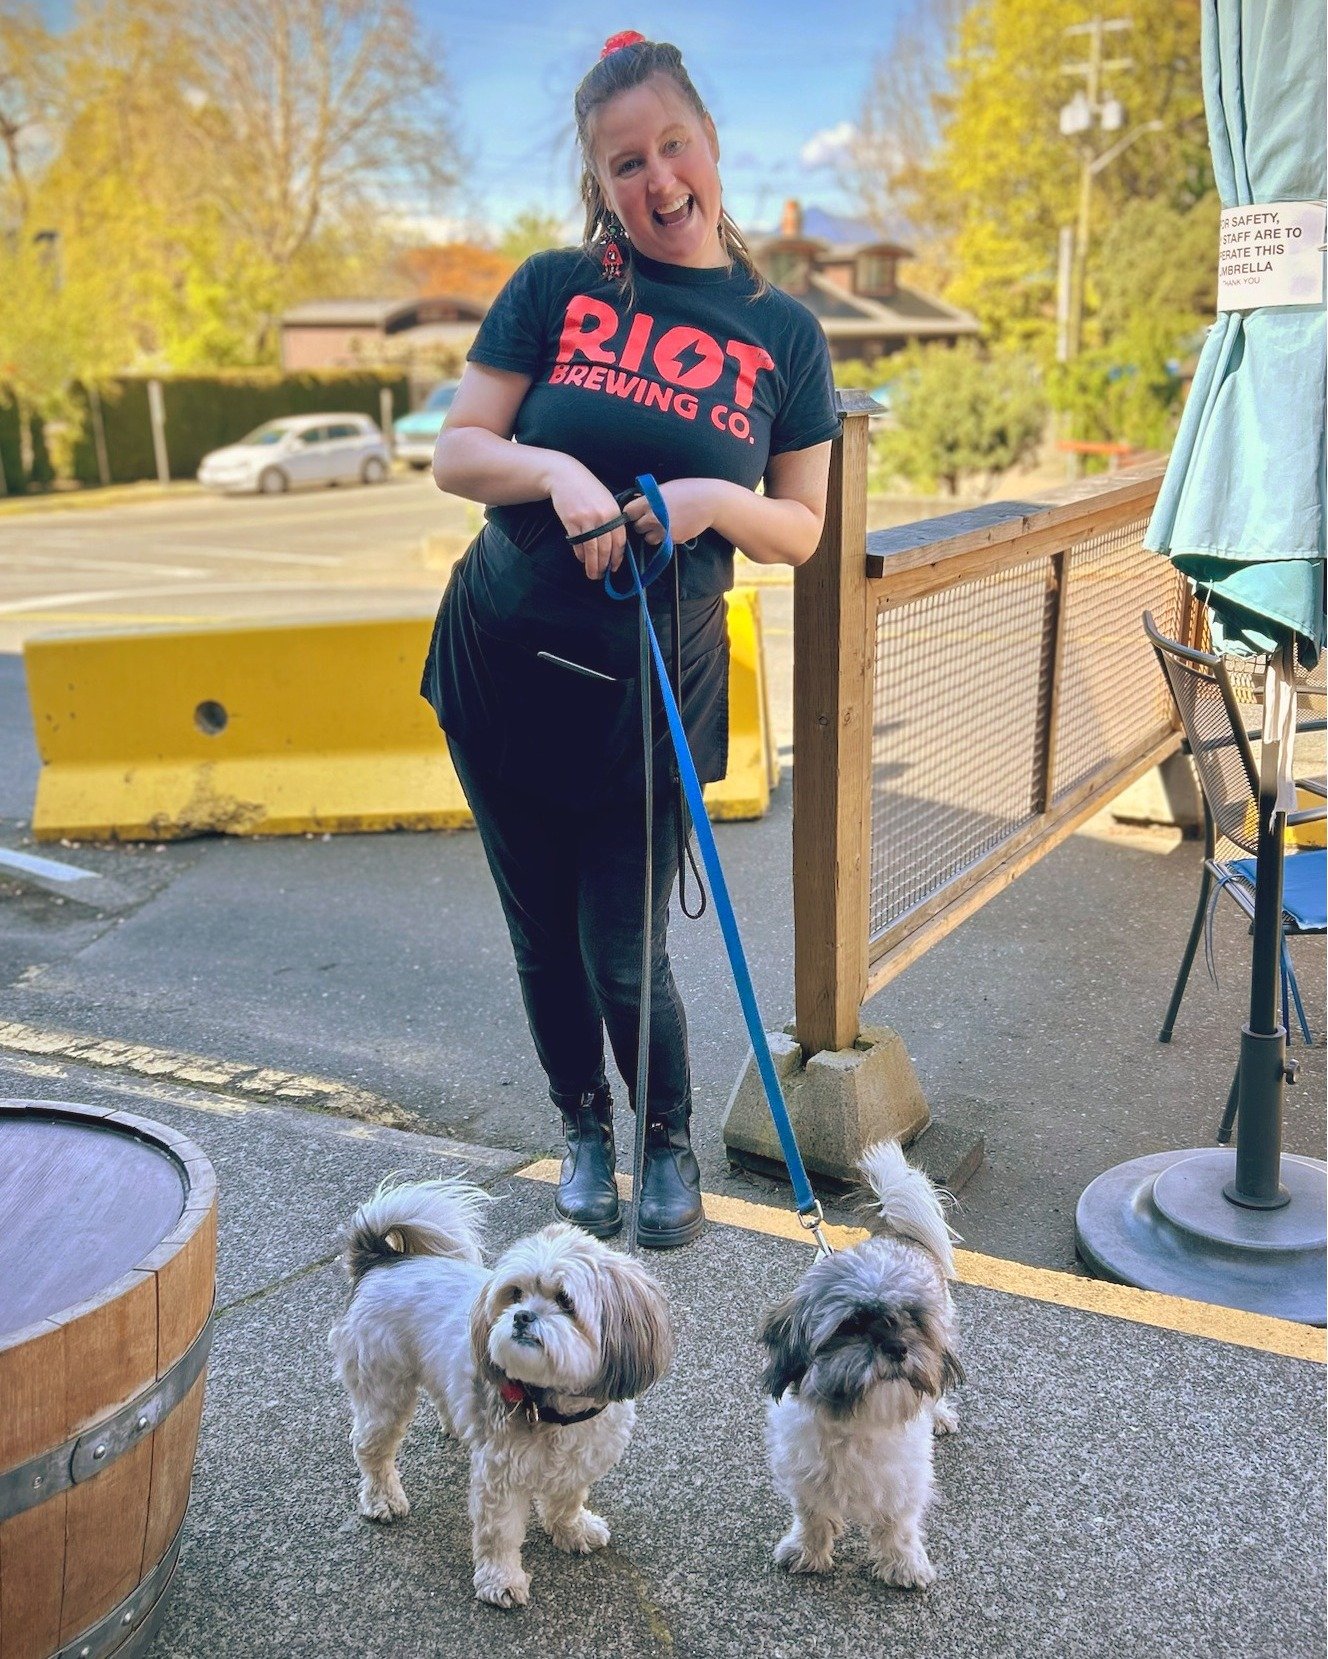 Vee hanging out with Carl &amp; Daisy on the patio 🐶💙 

We're hoping for a long (and pup-filled) patio season ahead!

.
.
.
.
#comoxvalleybrunch #yqqfoodies #comoxbc #downtowncomox #explorecomoxvalley #brunchgoals #comoxbrunch #comoxrestaurant